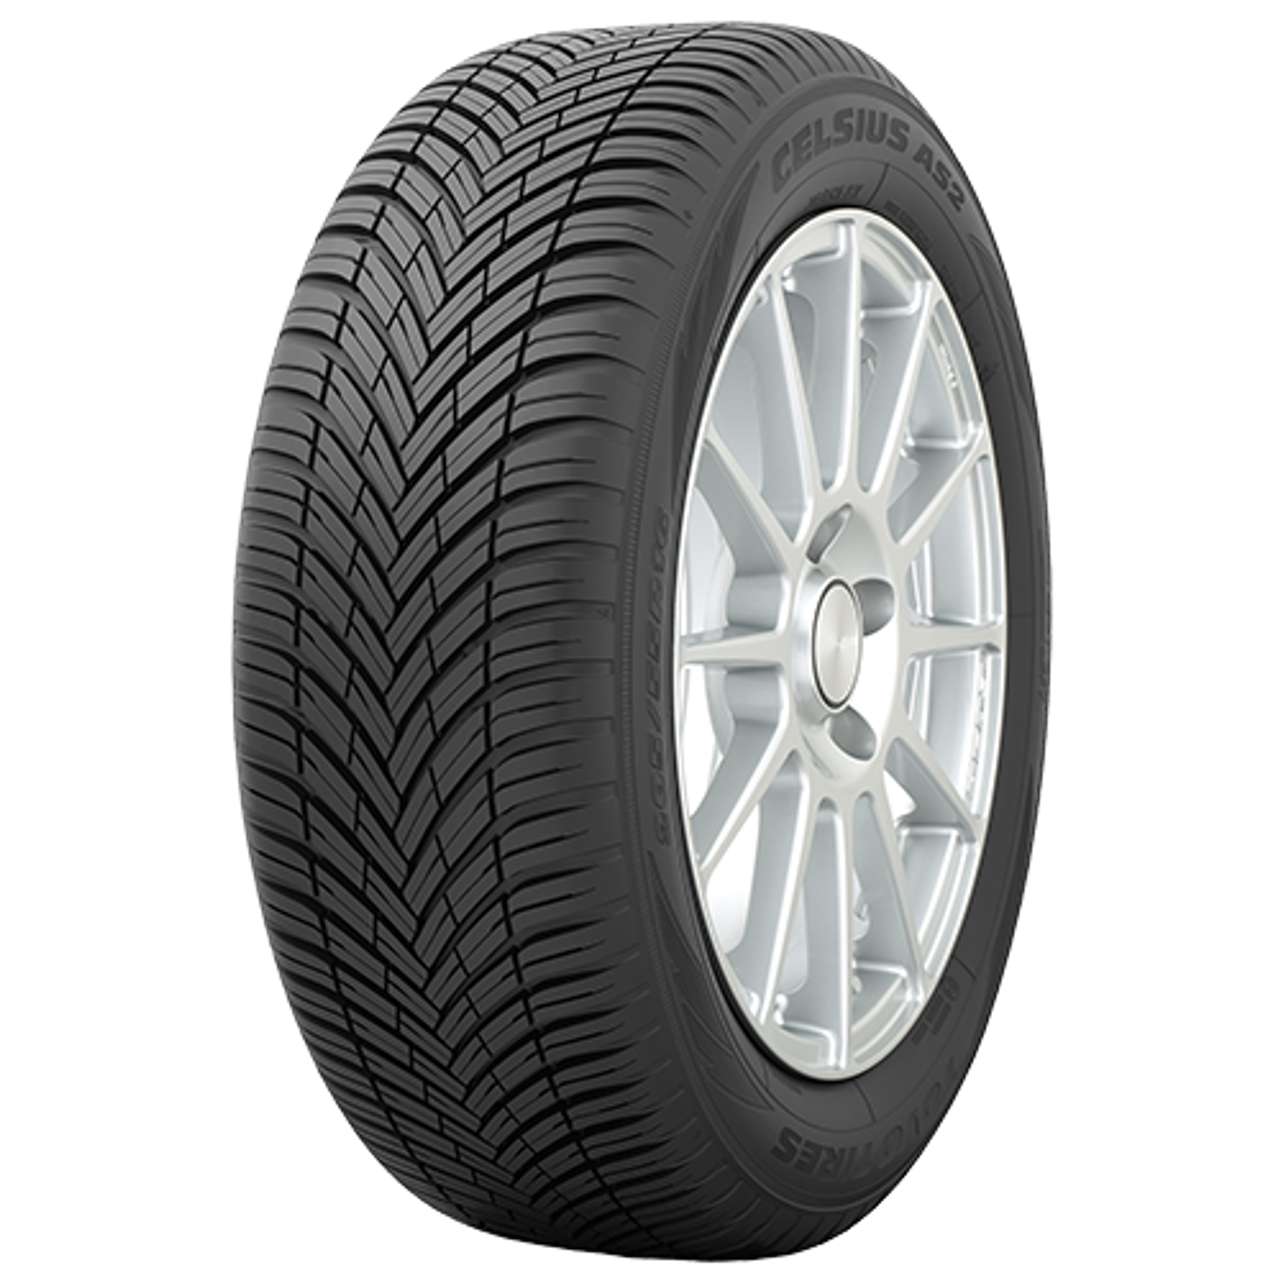 TOYO CELSIUS AS2 215/45R20 95T BSW